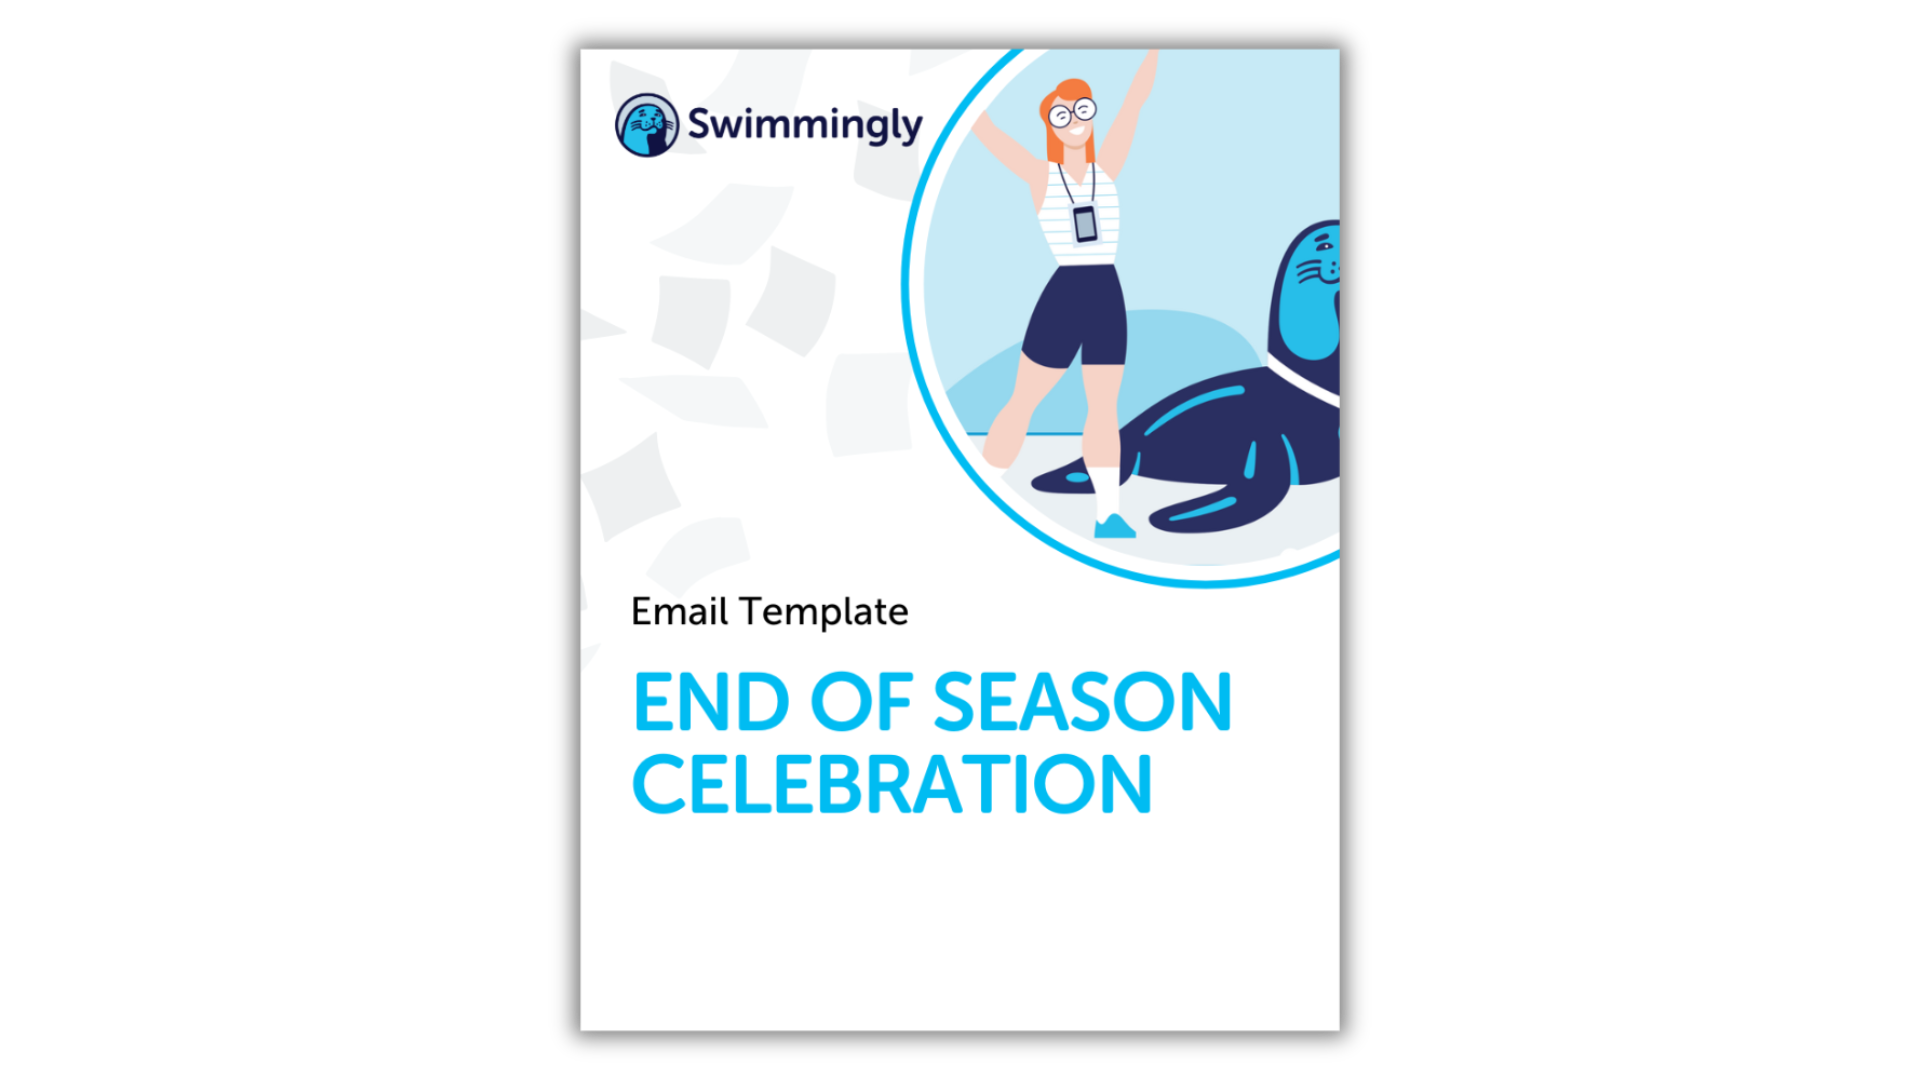 Email Template - End of Season Celebration